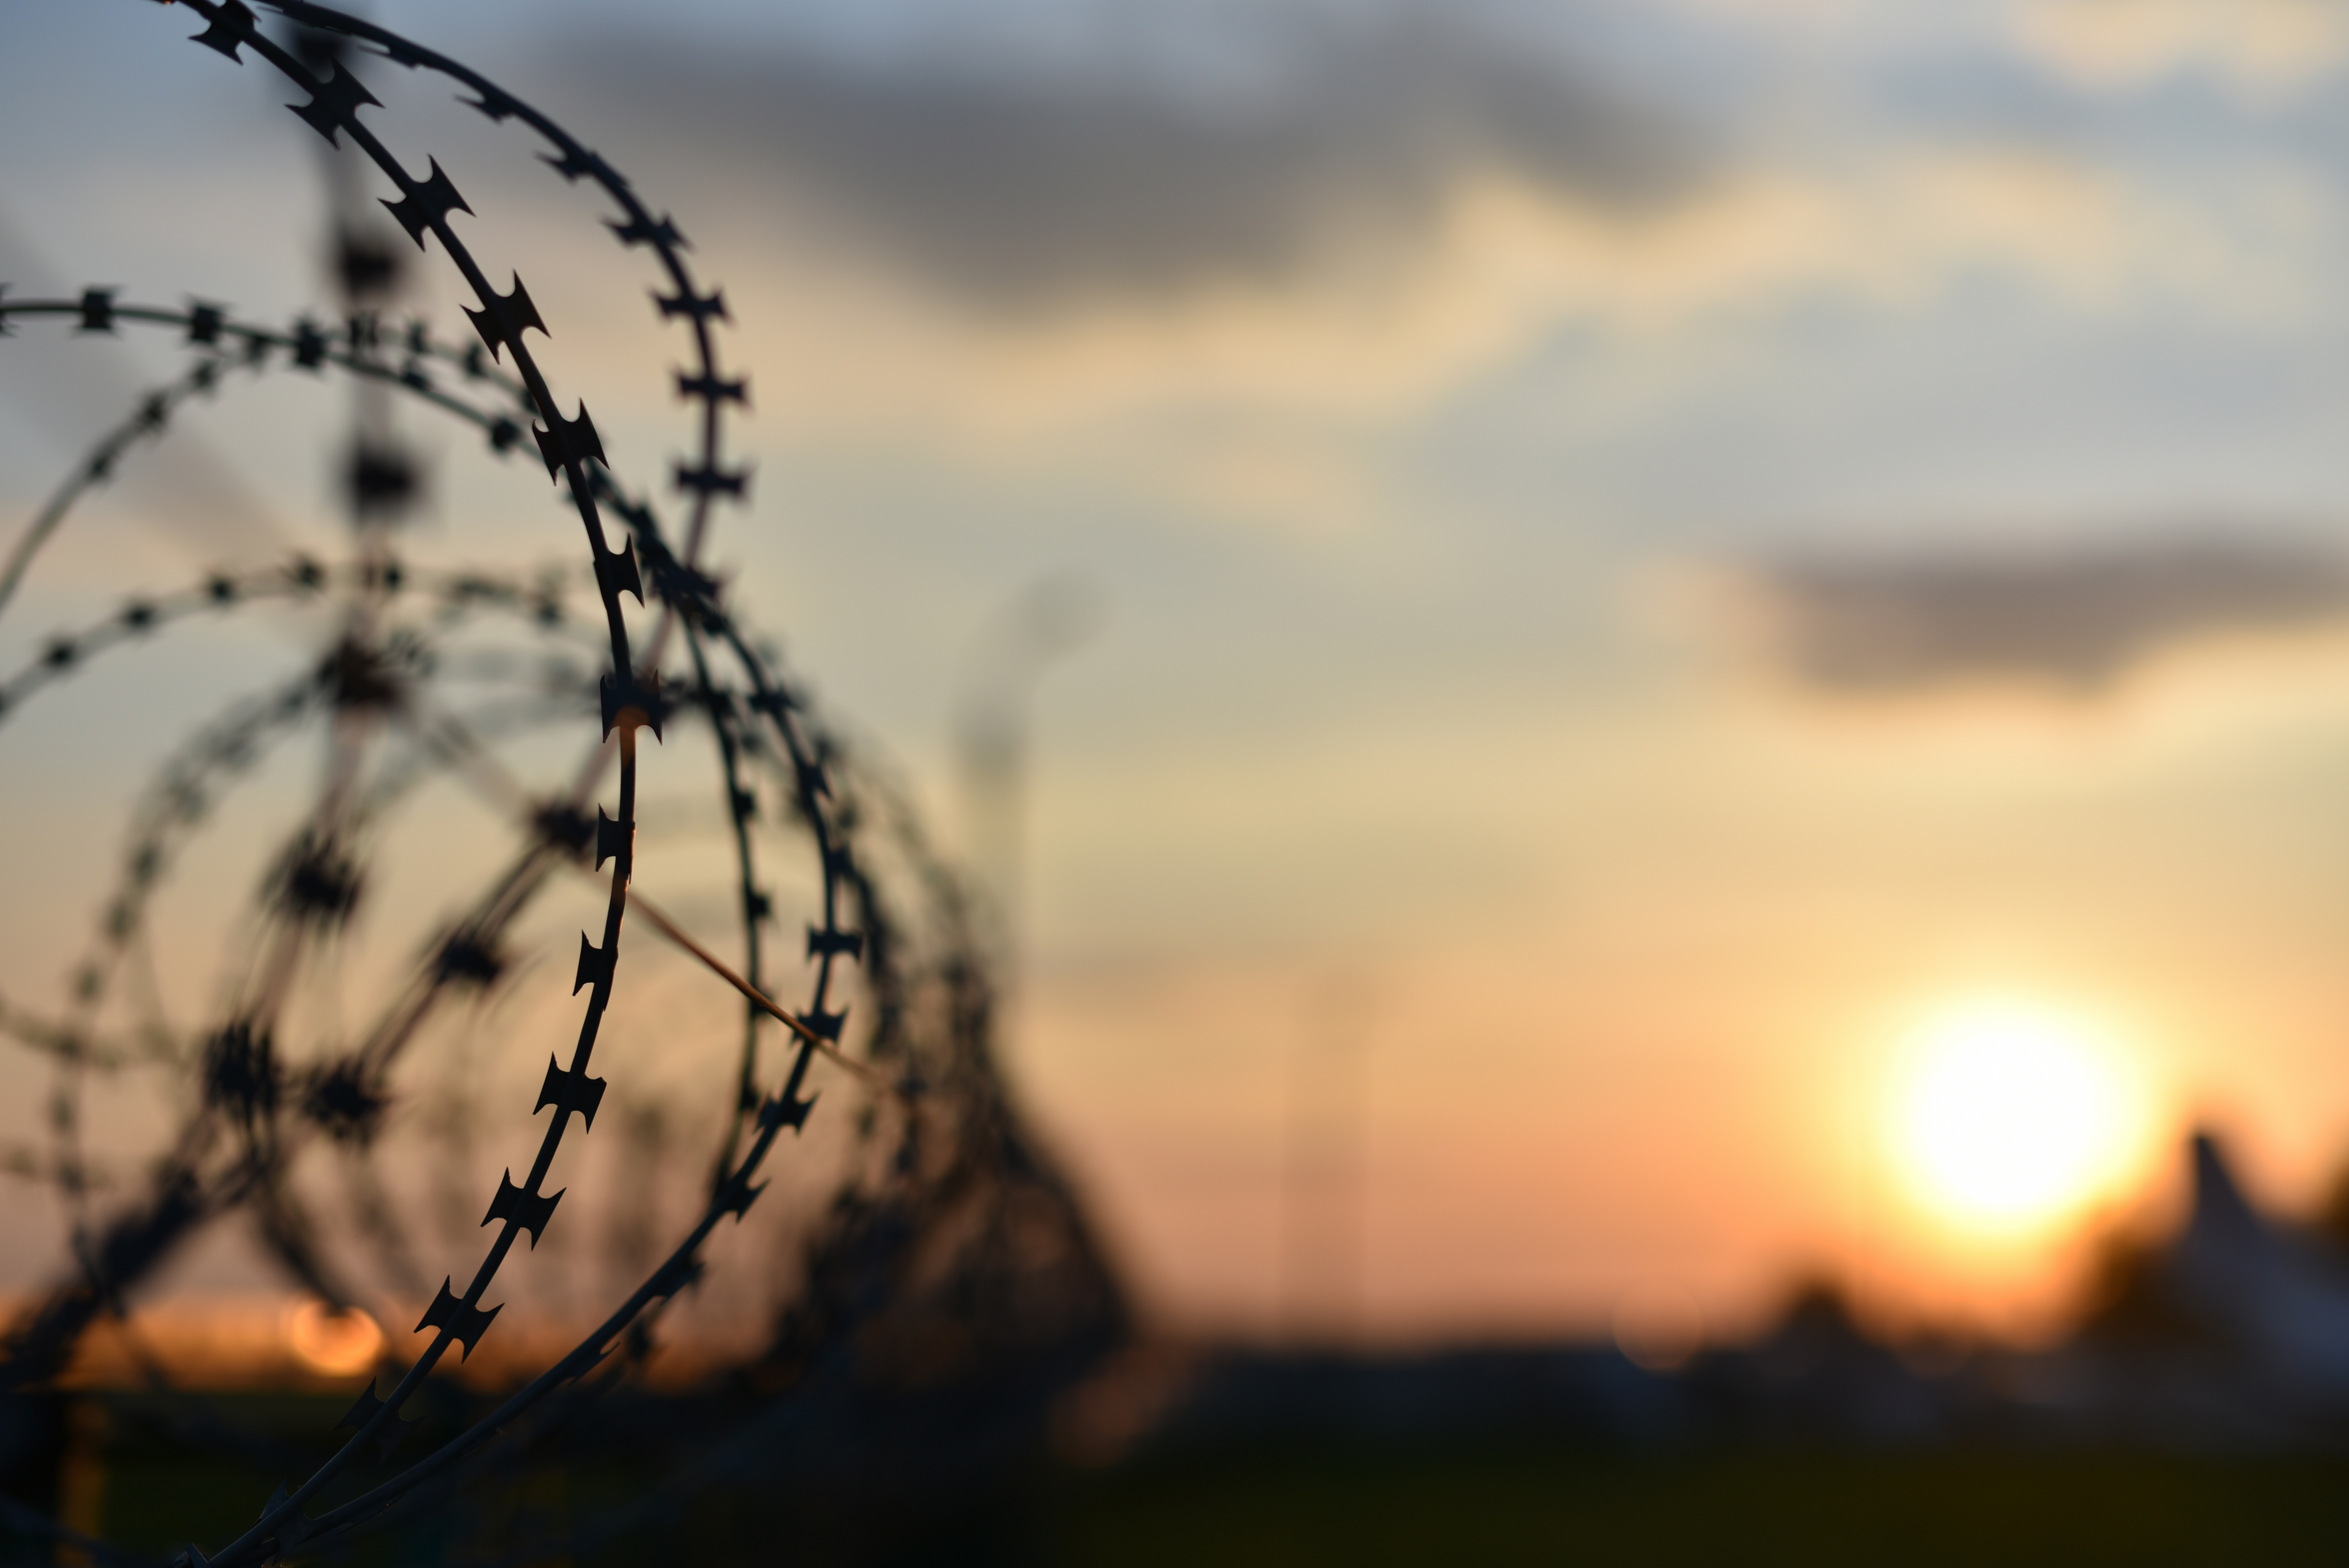 Barbed wire of prison fence. | Source: Shutterstock